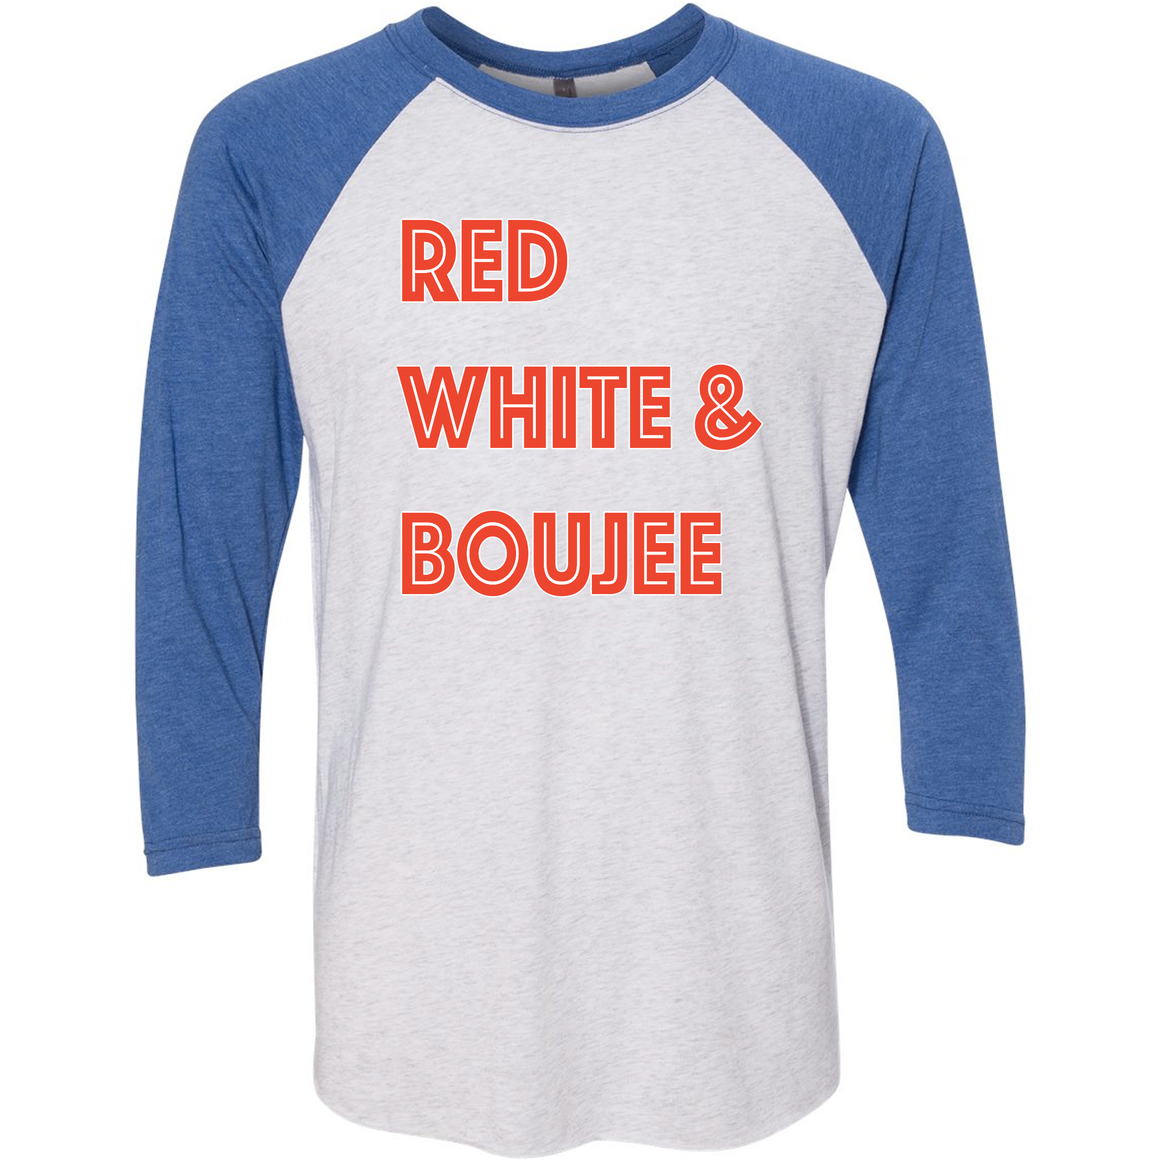 Triblend Red, White, and Boujee Unisex 3/4 Sleeve Baseball Tee